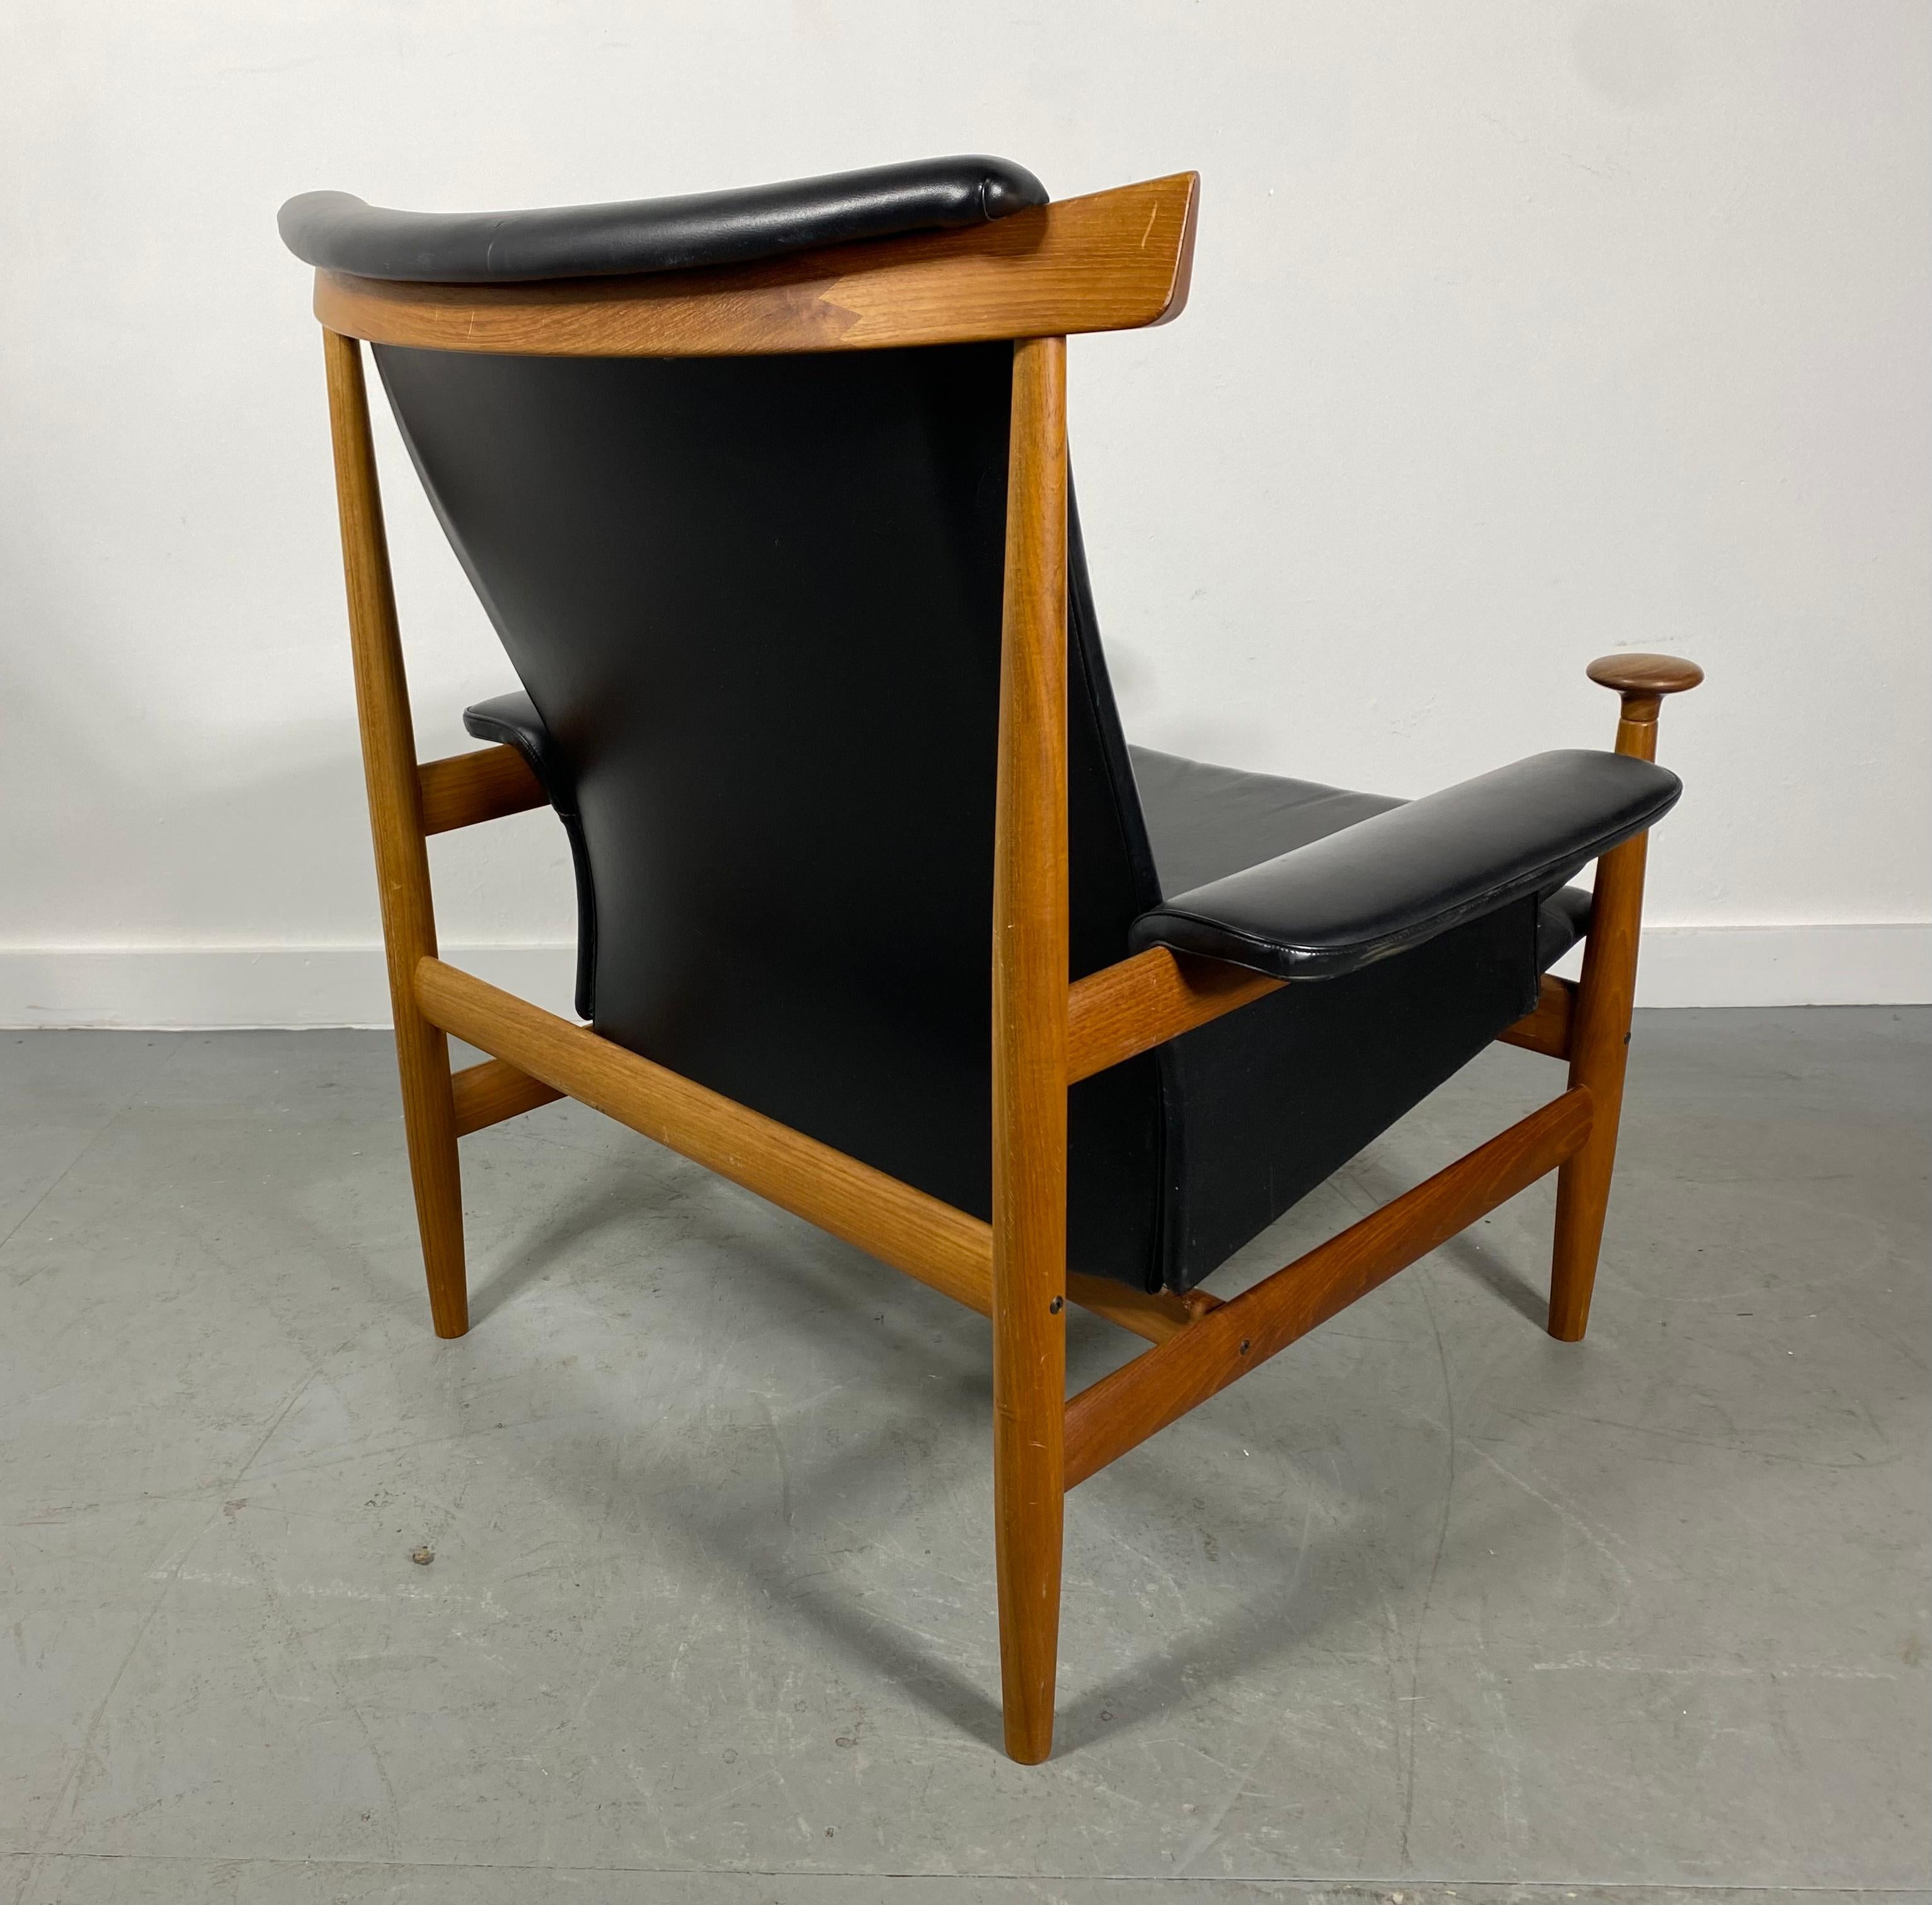 Finn Juhl easy chair and ottoman, Bwana by France & Daverkosen, made in Denmark. Excellent condition. Wonderful patina, color and finish. Extremely comfortable. Retains original metal badge labels. Hand delivery avail to New York City or anywhere en